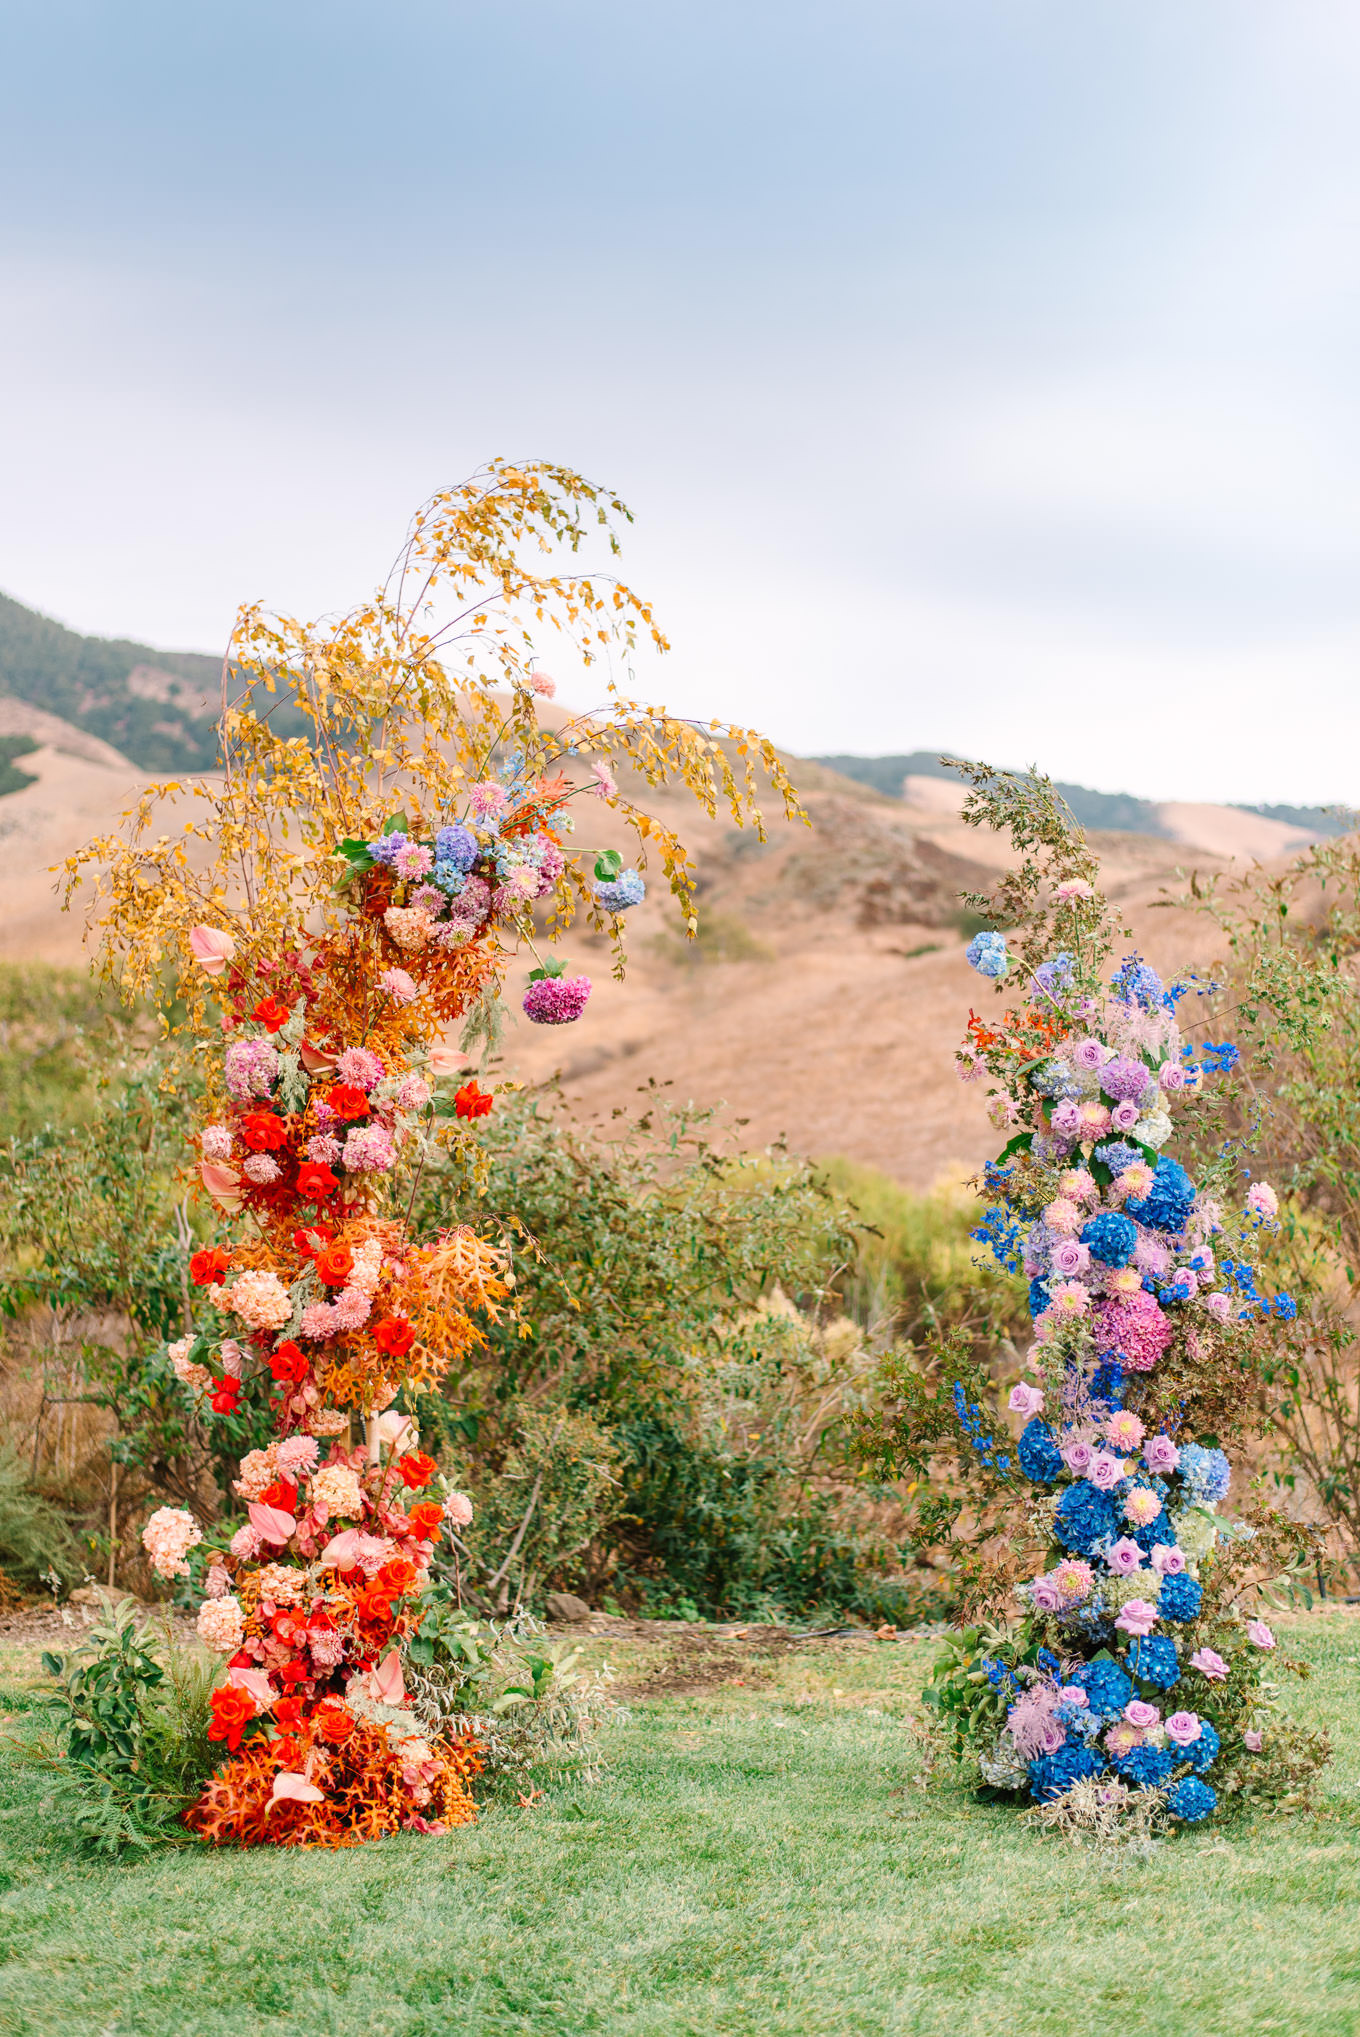 Colorful floral arches for wedding ceremony | Colorful and quirky wedding at Higuera Ranch in San Luis Obispo | #sanluisobispowedding #californiawedding #higueraranch #madonnainn   Source: Mary Costa Photography | Los Angeles